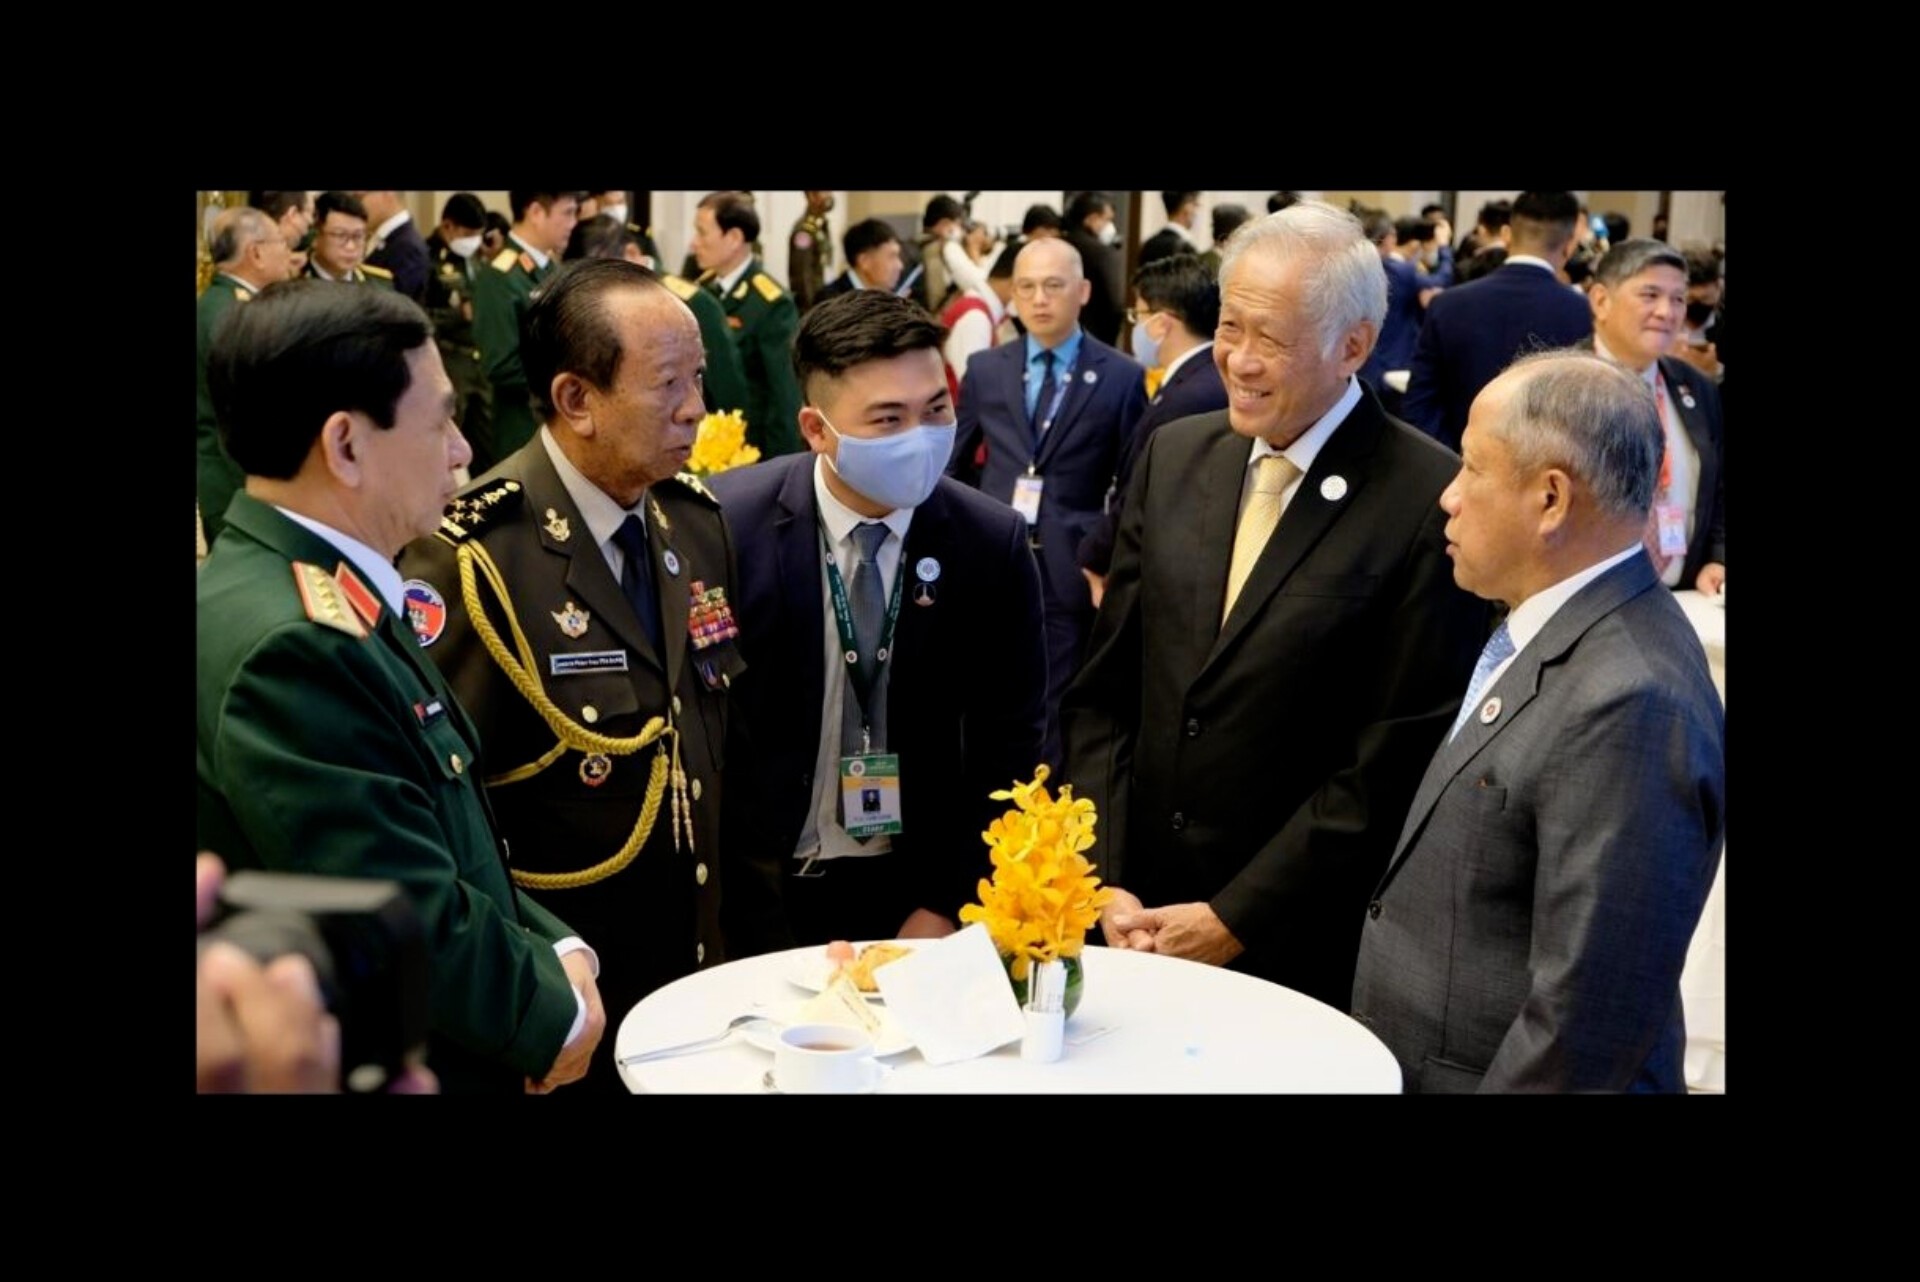 General (GEN) Phan Van Giang, Vietnam's Minister of National Defence (extreme left), Cambodia's Deputy Prime Minister and Minister of National Defence GEN Tea Banh (second from left), Minister for Defence Dr Ng Eng Hen (second from right) and Pehin Datu Lailaraja Major General (Retired) Dato Paduka Seri Haji Awang Halbi bin Haji Mohd Yussof, Minister at the Prime Minister's Office of Brunei Darussalam (extreme right) at the 16th ASEAN Defence Ministers' Meeting (ADMM).